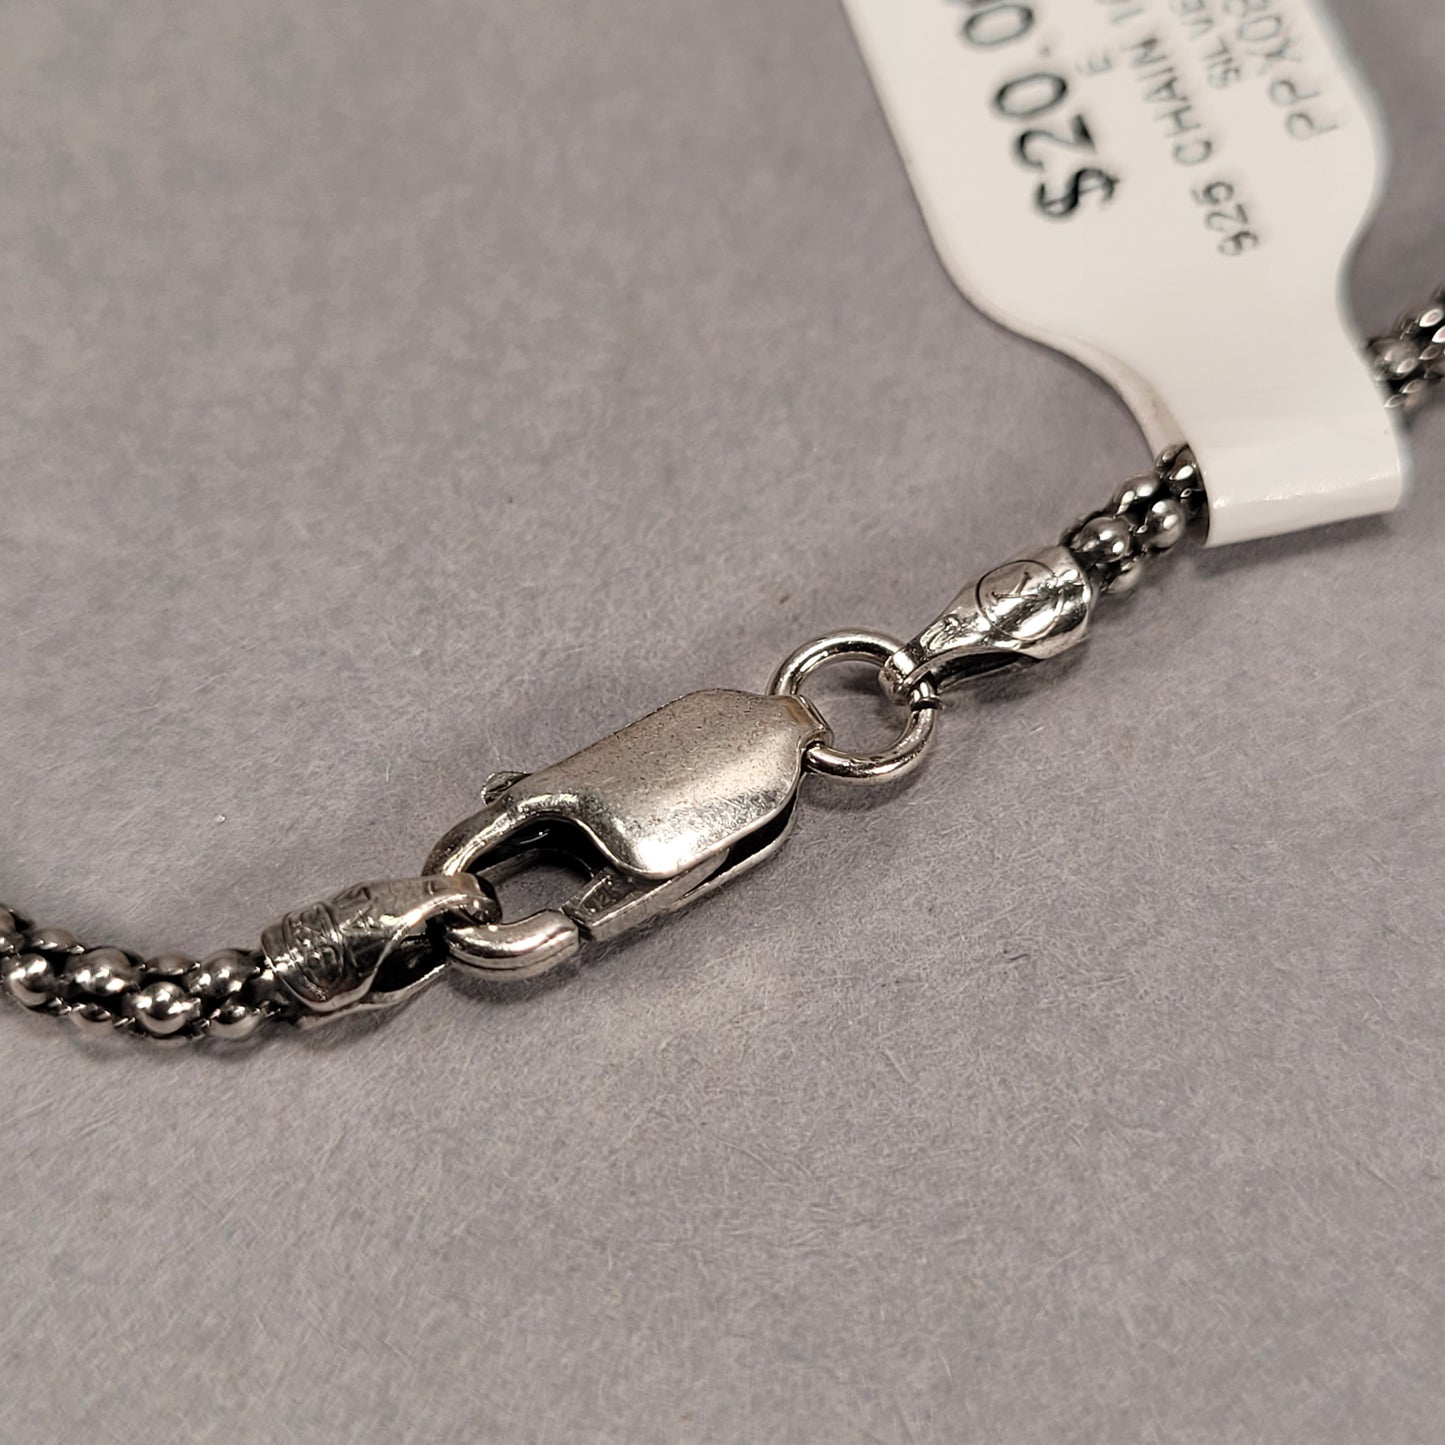 16" Sterling Silver Chain 4.8g